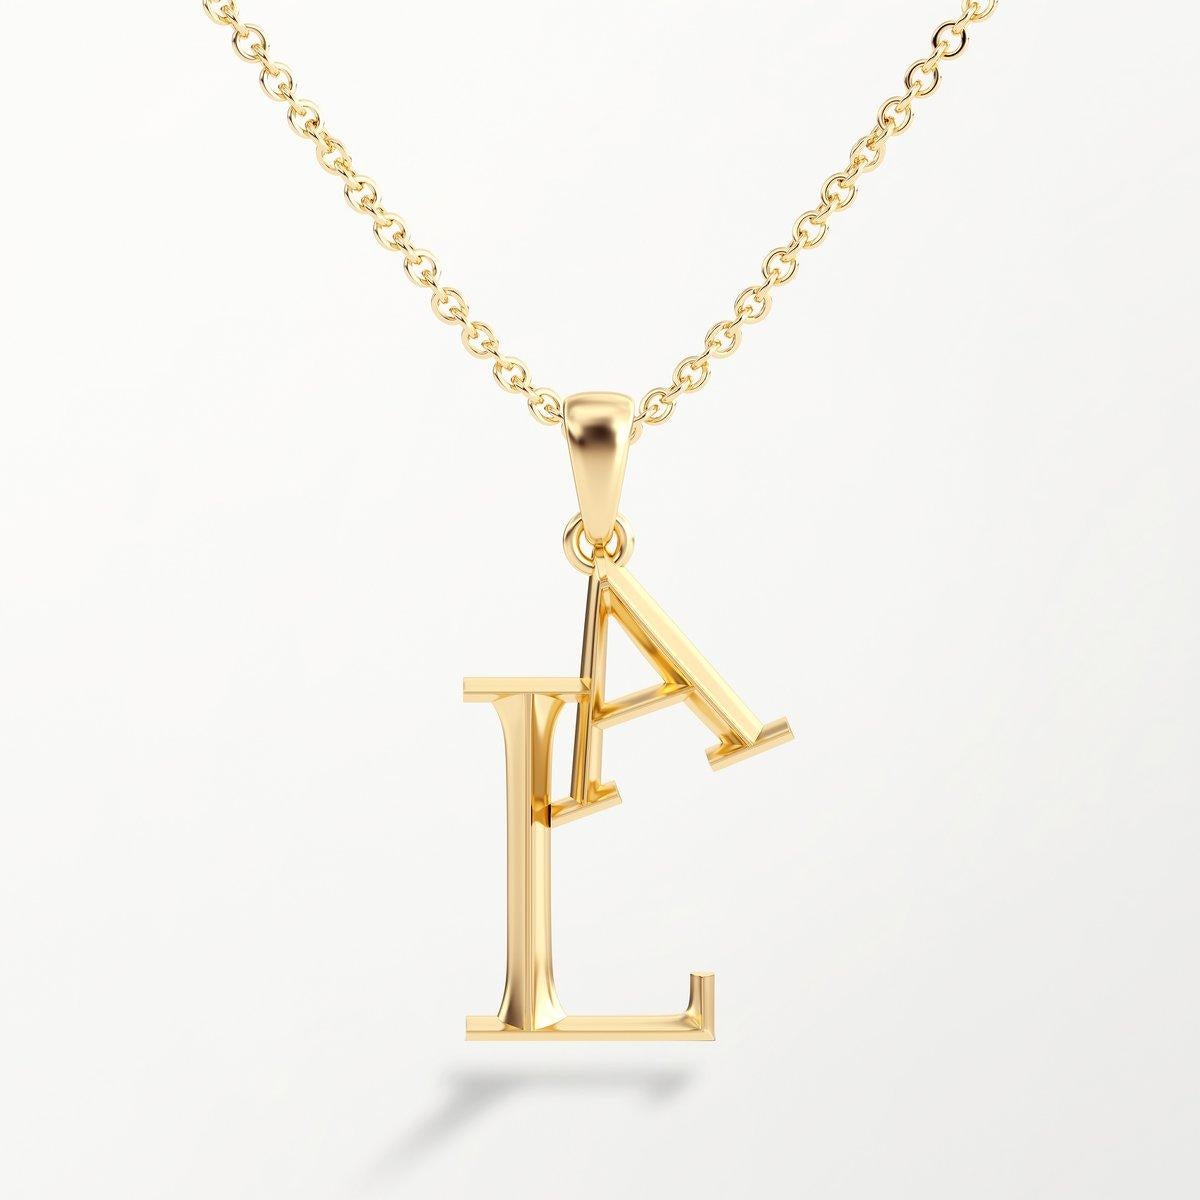 Medium Initial Pendant Necklace in 18k Yellow, White or Rose Gold 19